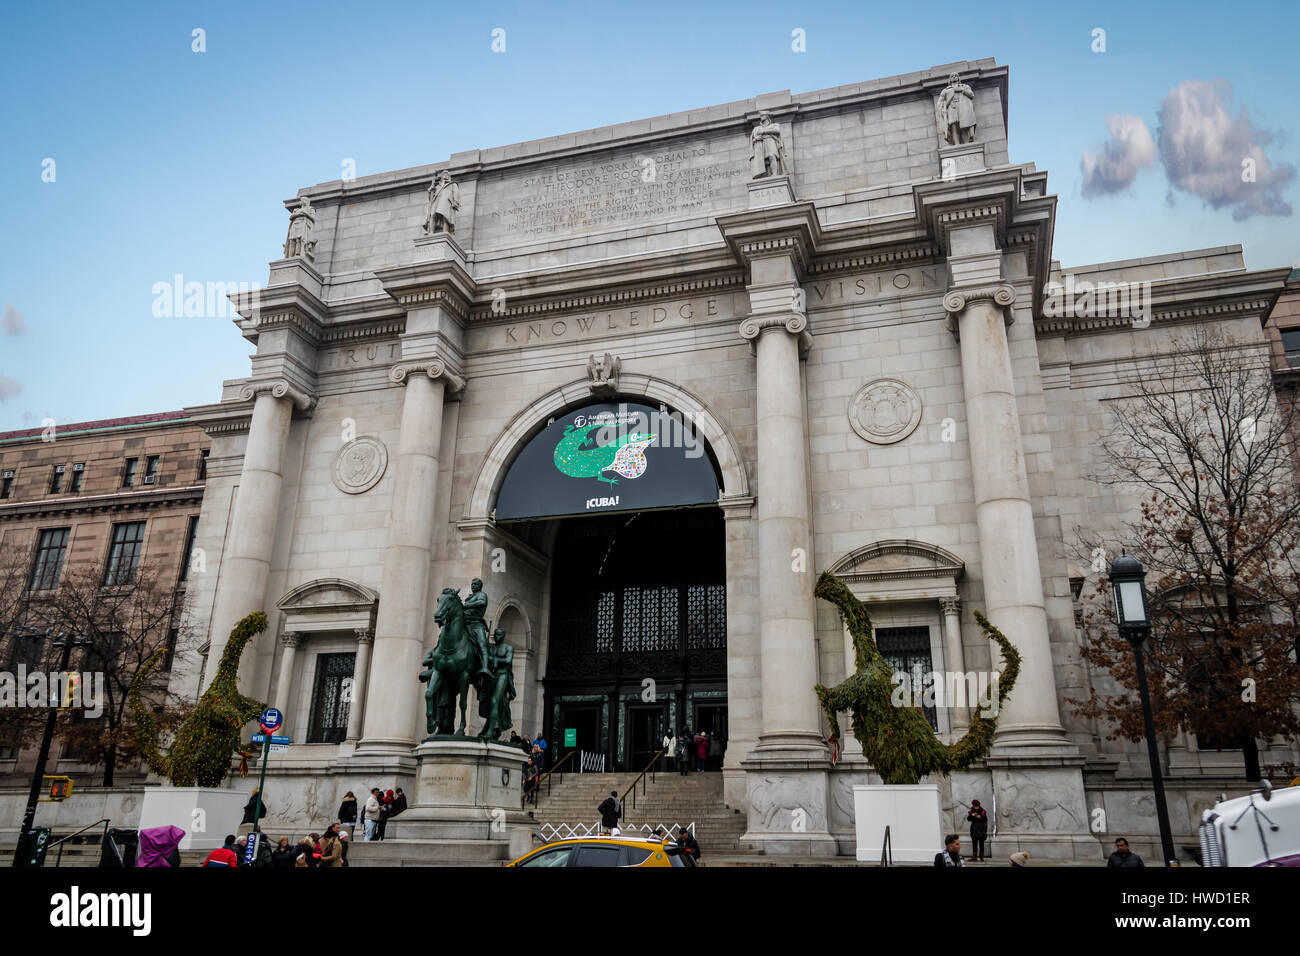 American Museum of Natural History - New York, USA Stock Photo